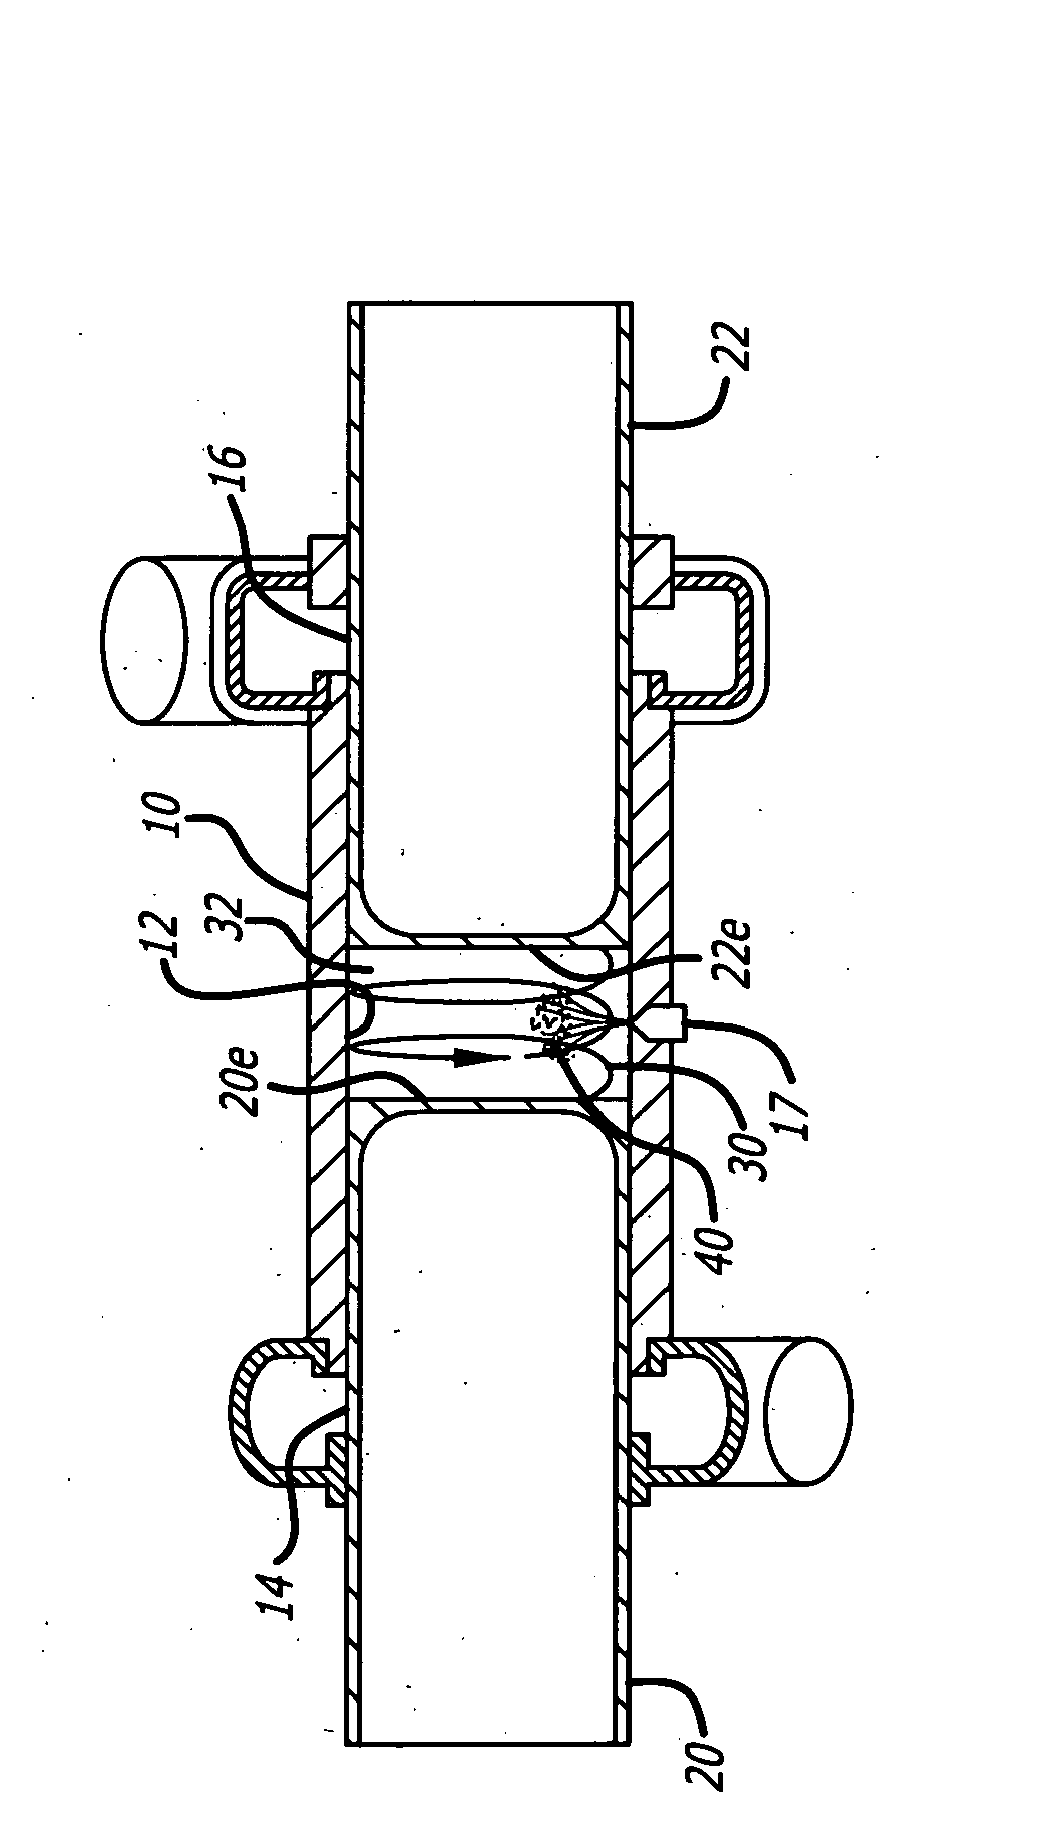 Combustion chamber constructions for opposed-piston engines